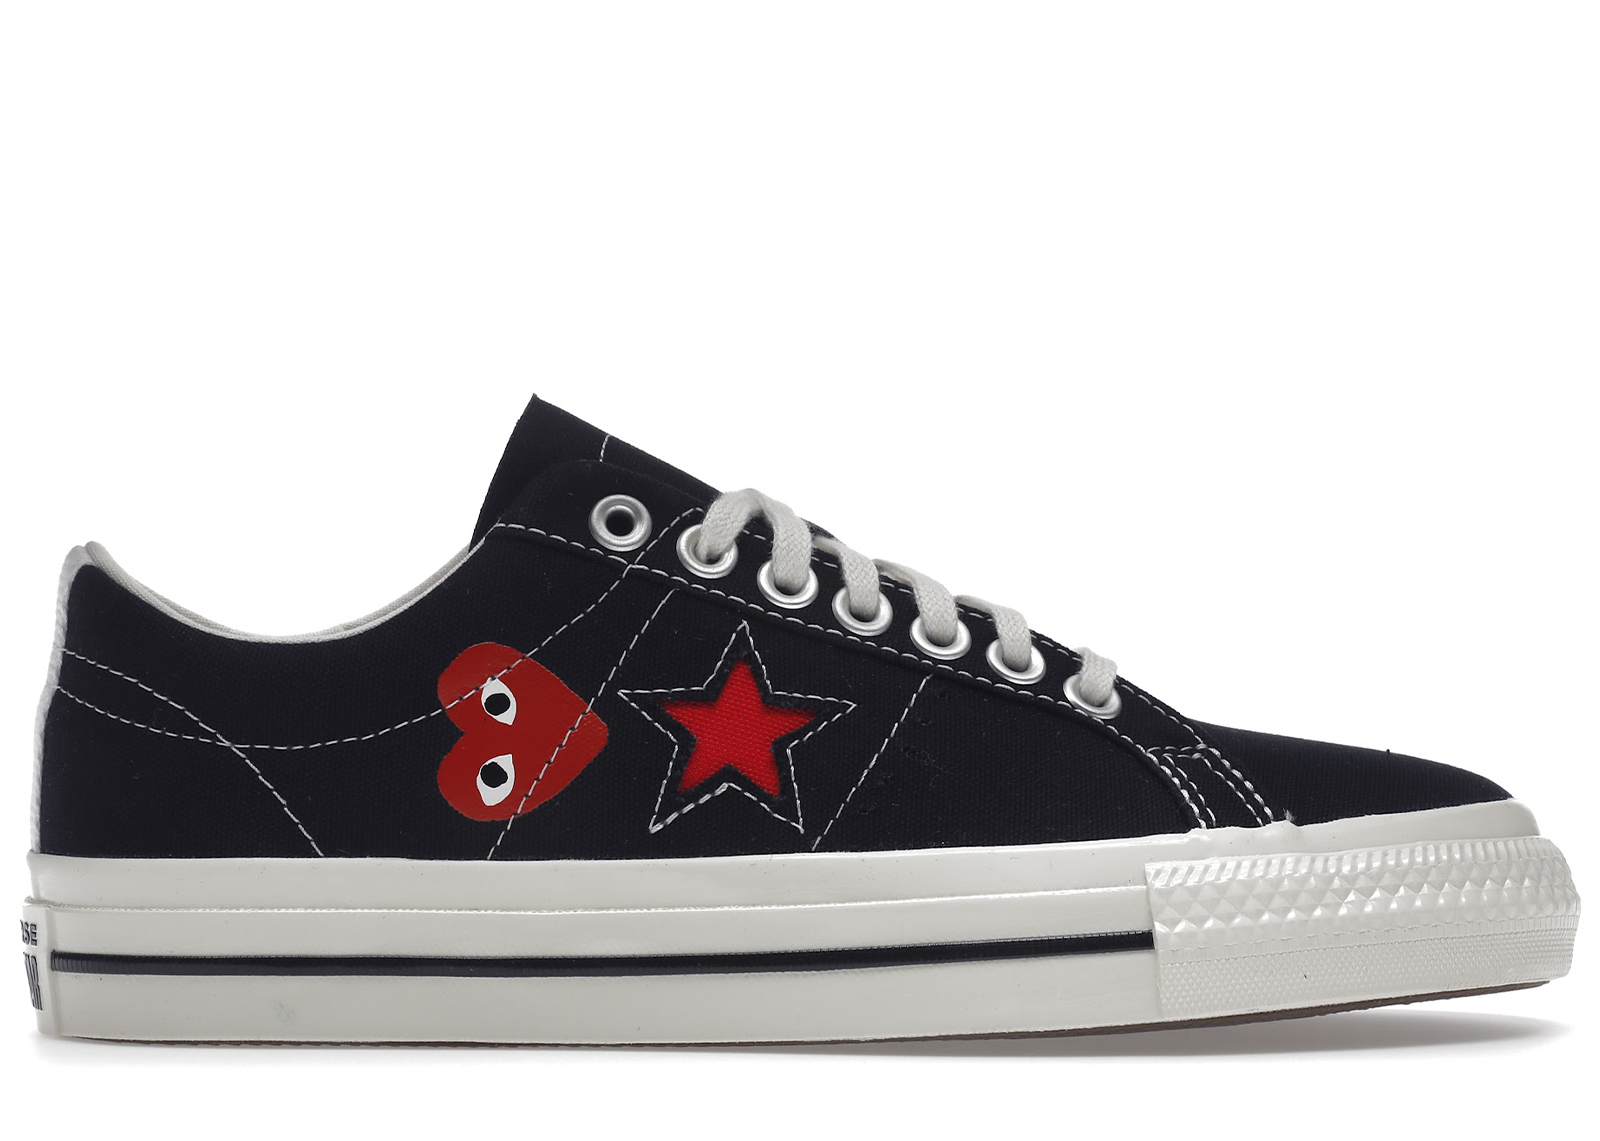 Converse One Star Ox Comme des Garcons PLAY Black - A01791C